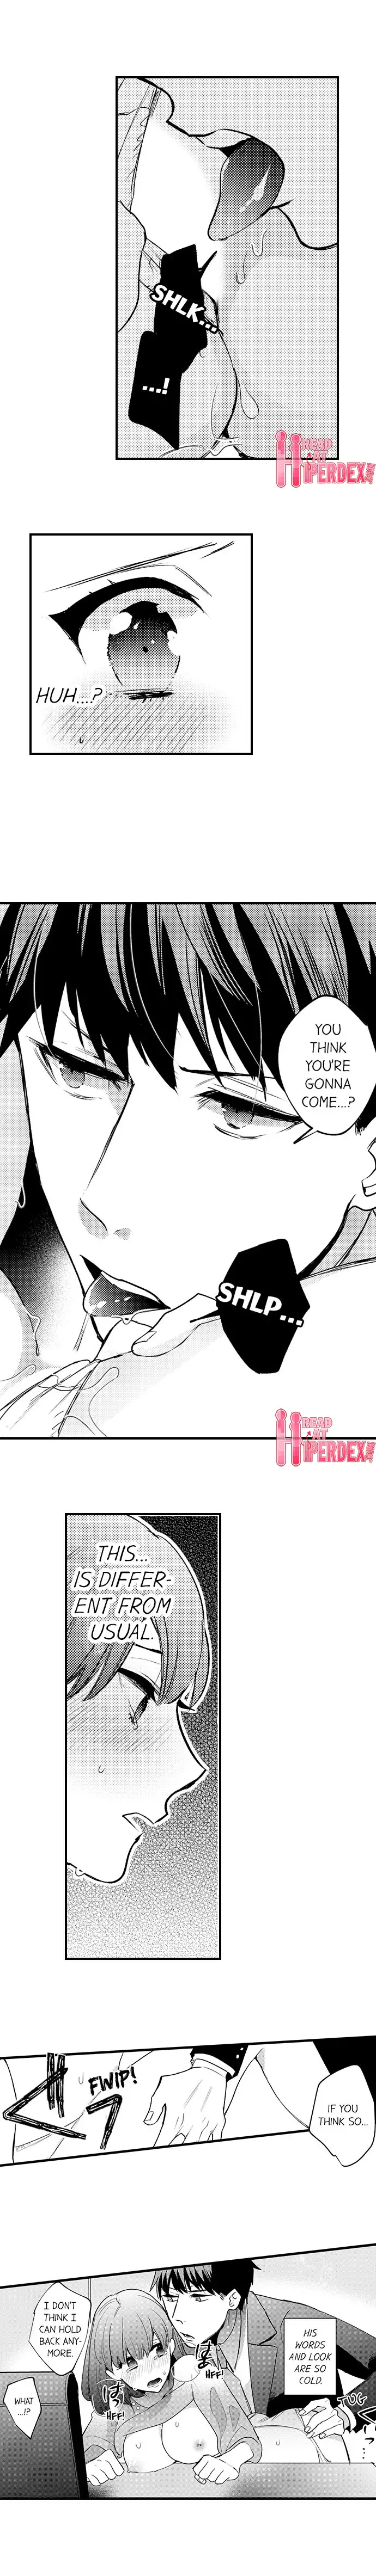 3 Hours + Love Hotel = You’re Mine - Chapter 9 Page 5